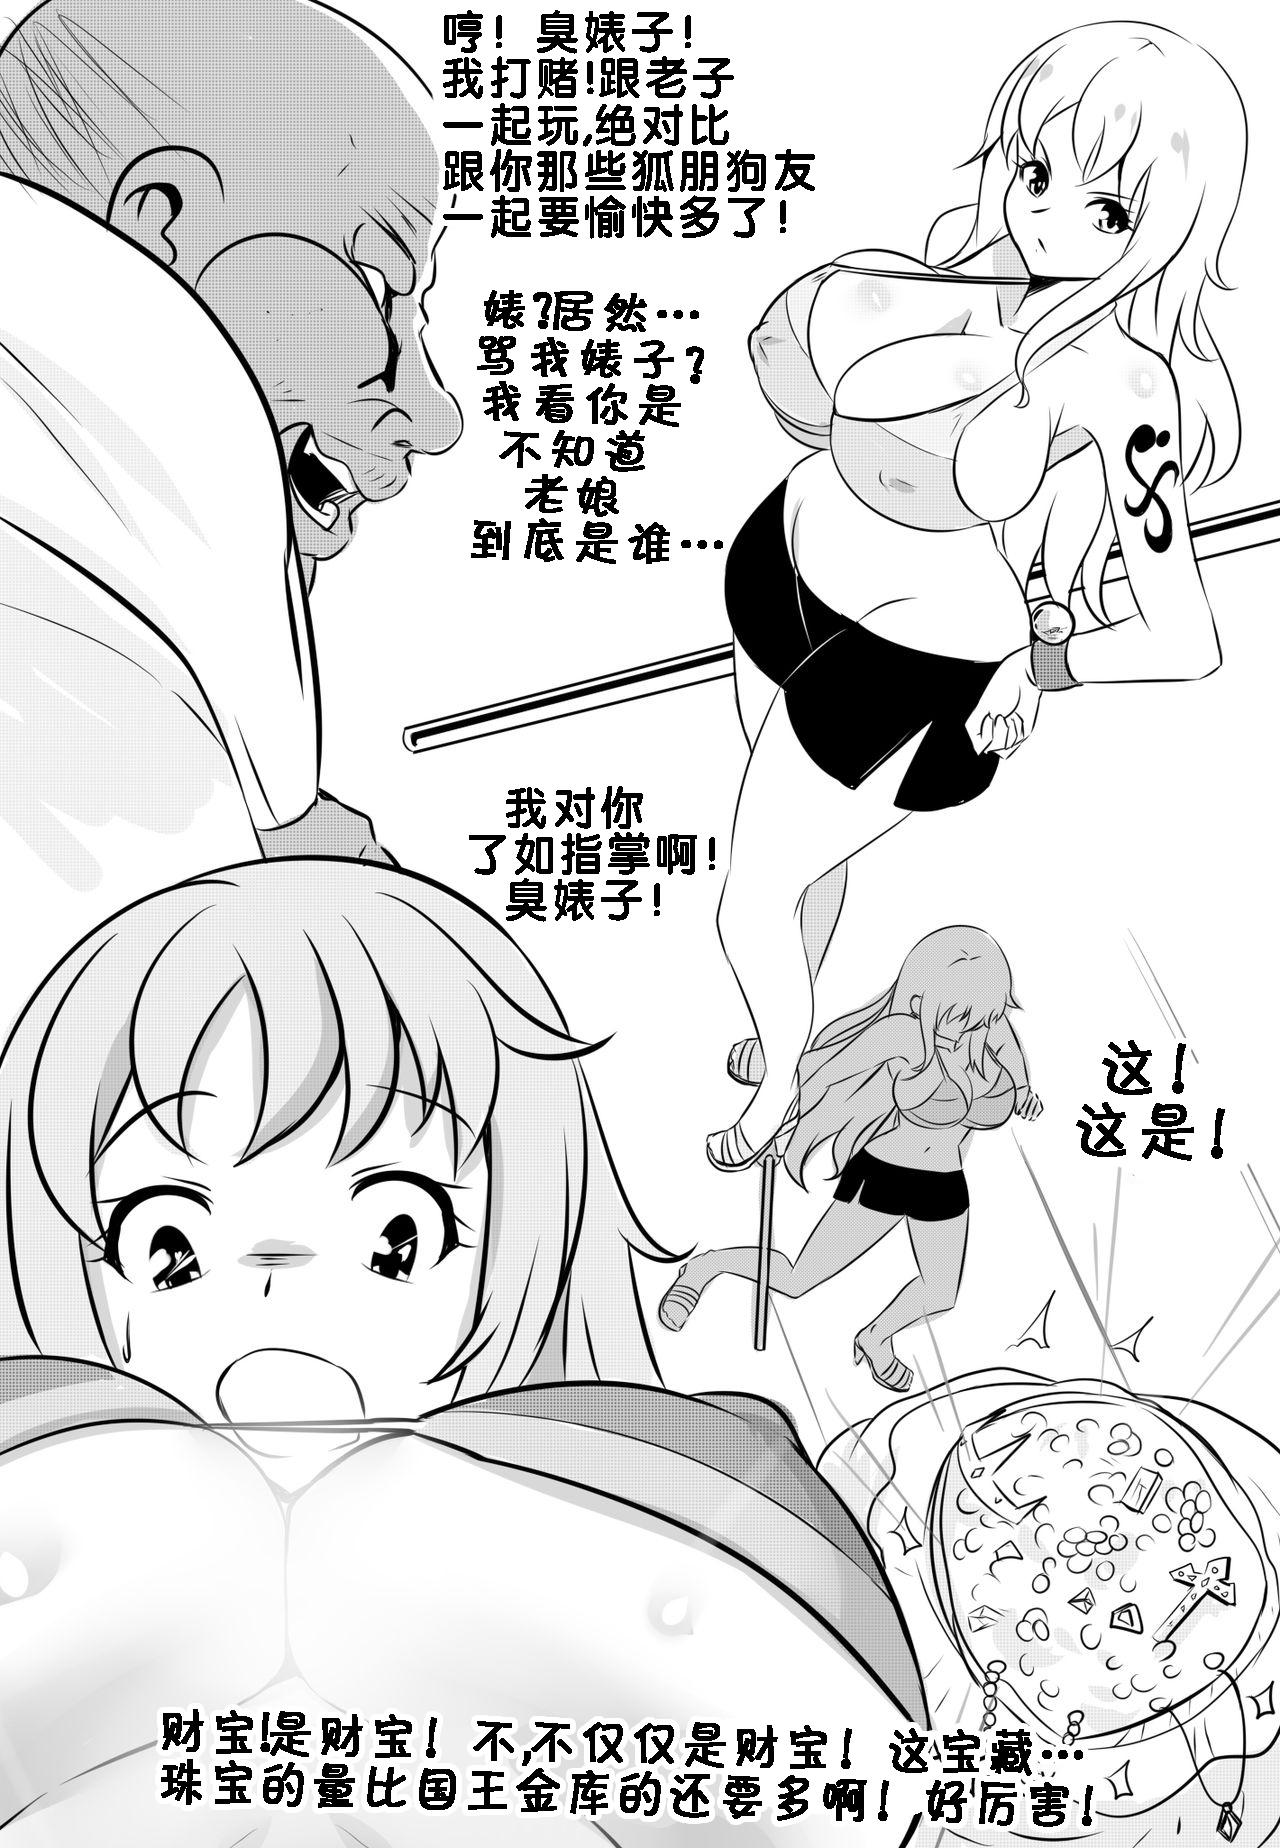 Classy Wenching 3 Nami Uncensored - One piece Butt - Page 4